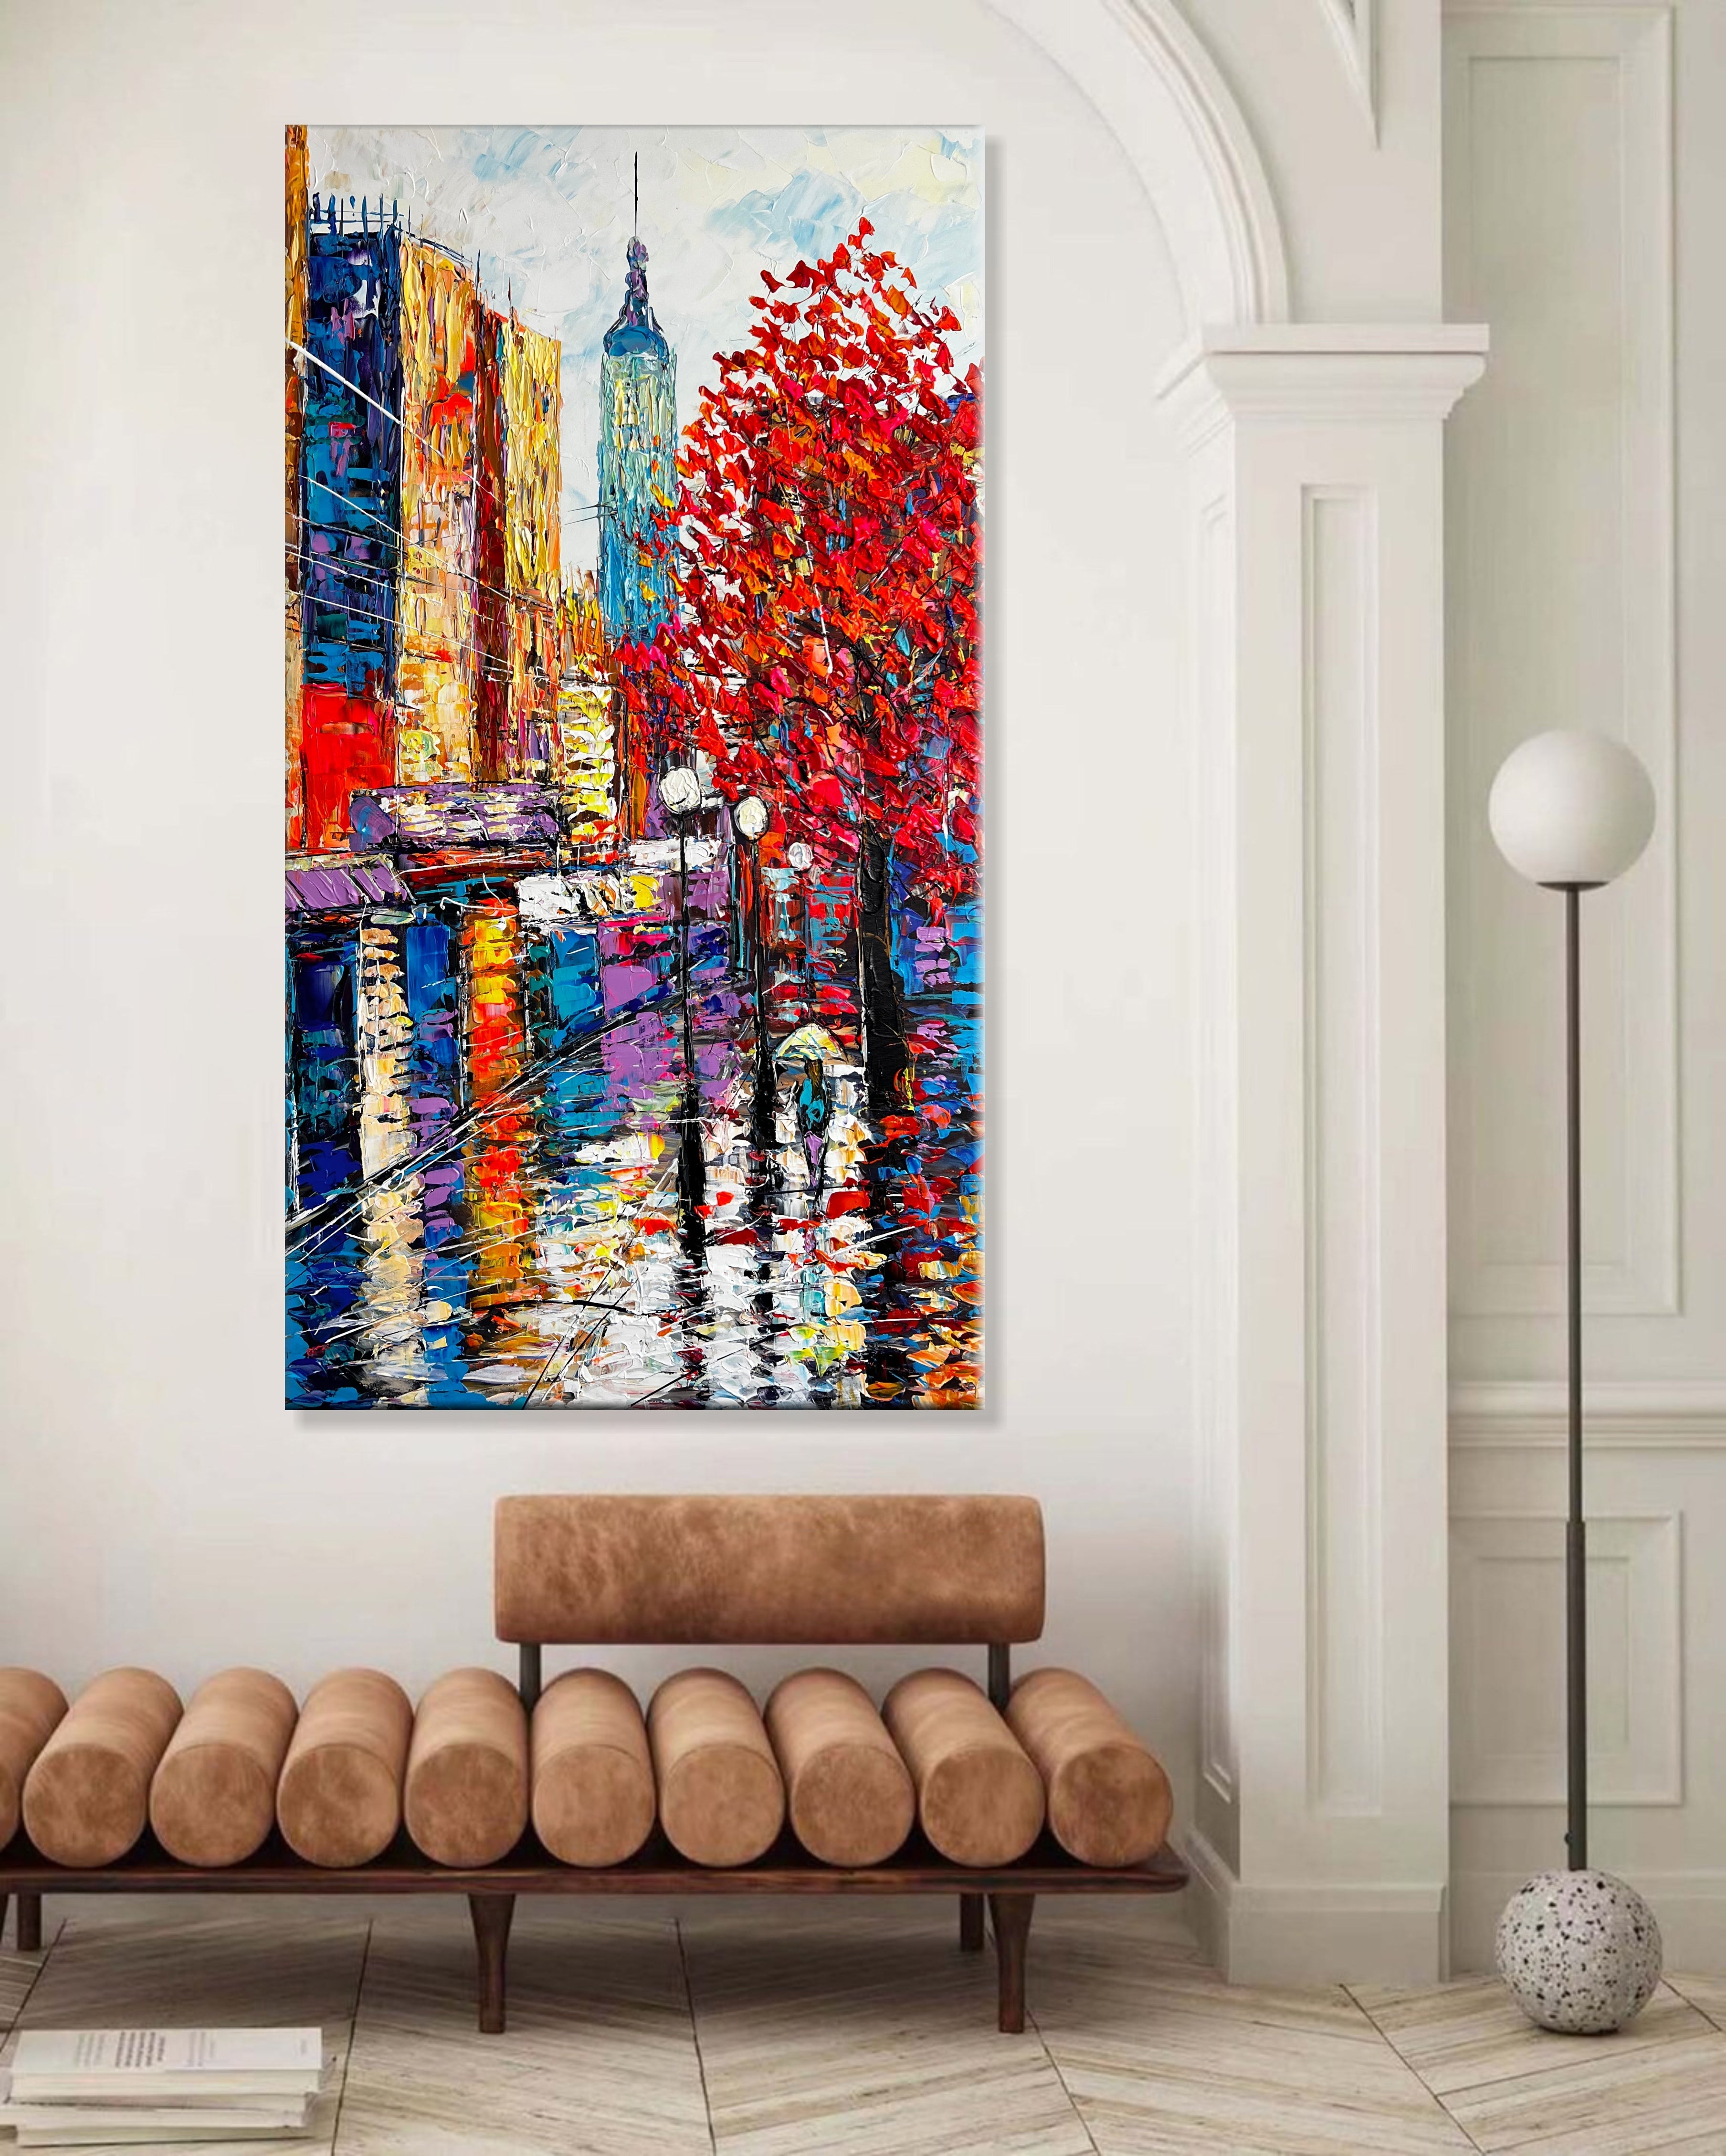 Modern Texture Wall Art Bright colors Abstract Oil Painting On Canvas Large  Original Painting For Living